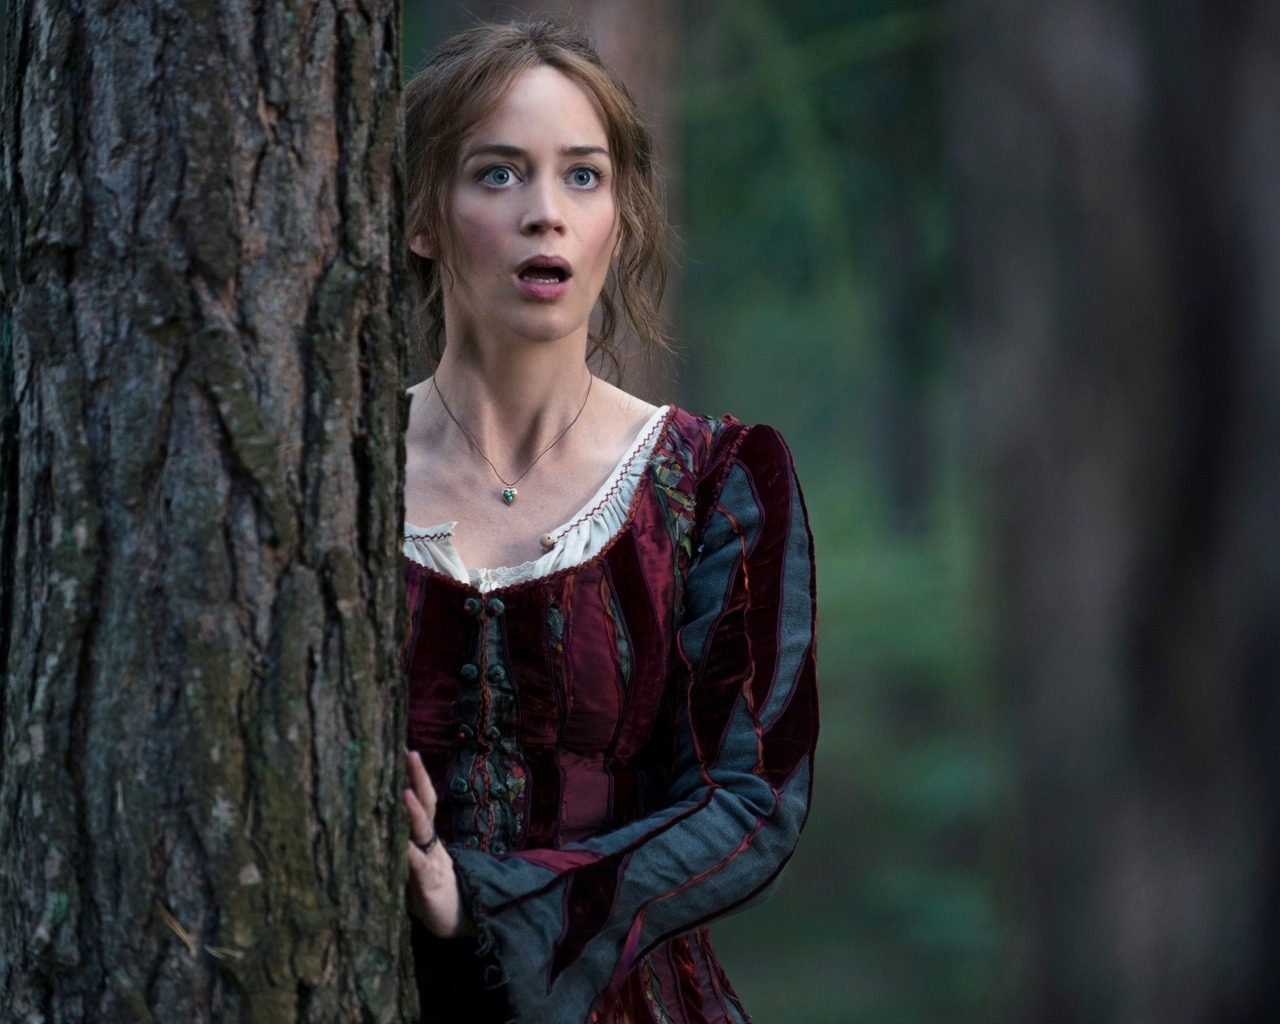 Into the Woods Emily Blunt for 1280 x 1024 resolution